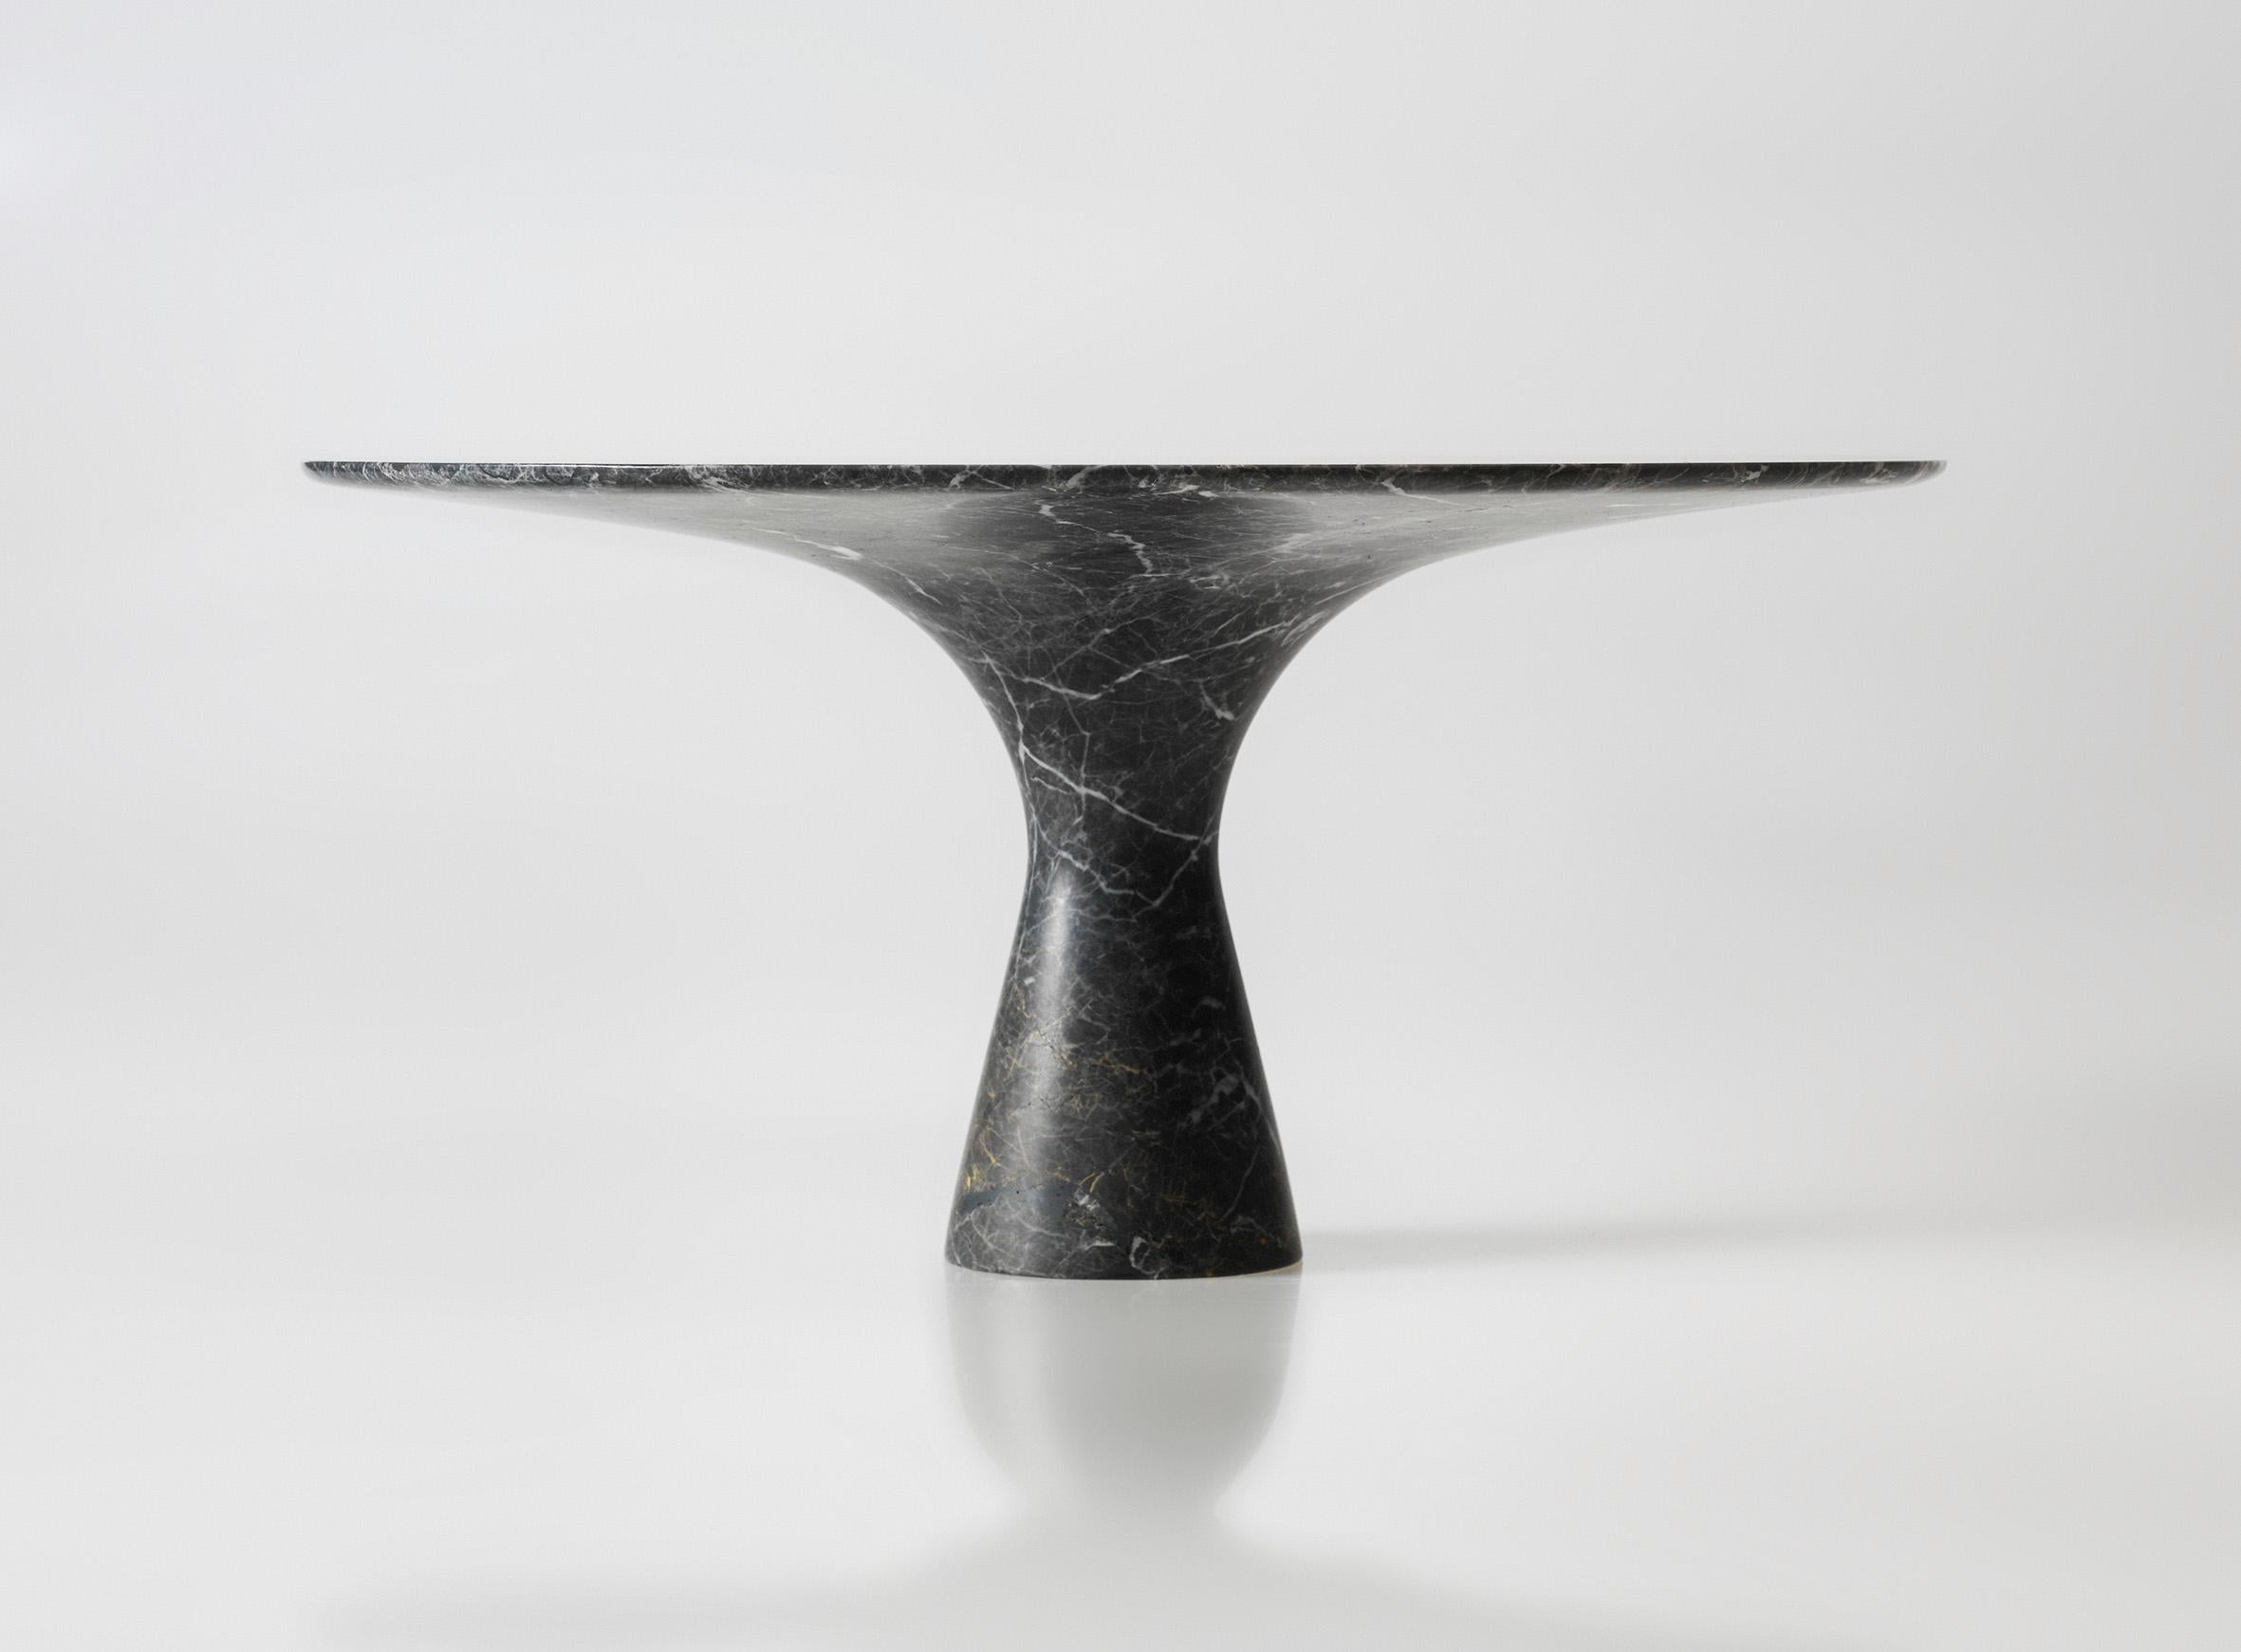 Grey Saint Laurent Refined Contemporary Marble Oval Table 210/75
Dimensions: 210 x 135 x 75 cm
Materials: Grey Saint Laurent marble.

Angelo is the essence of a round table in natural stone, a sculptural shape in robust material with elegant lines